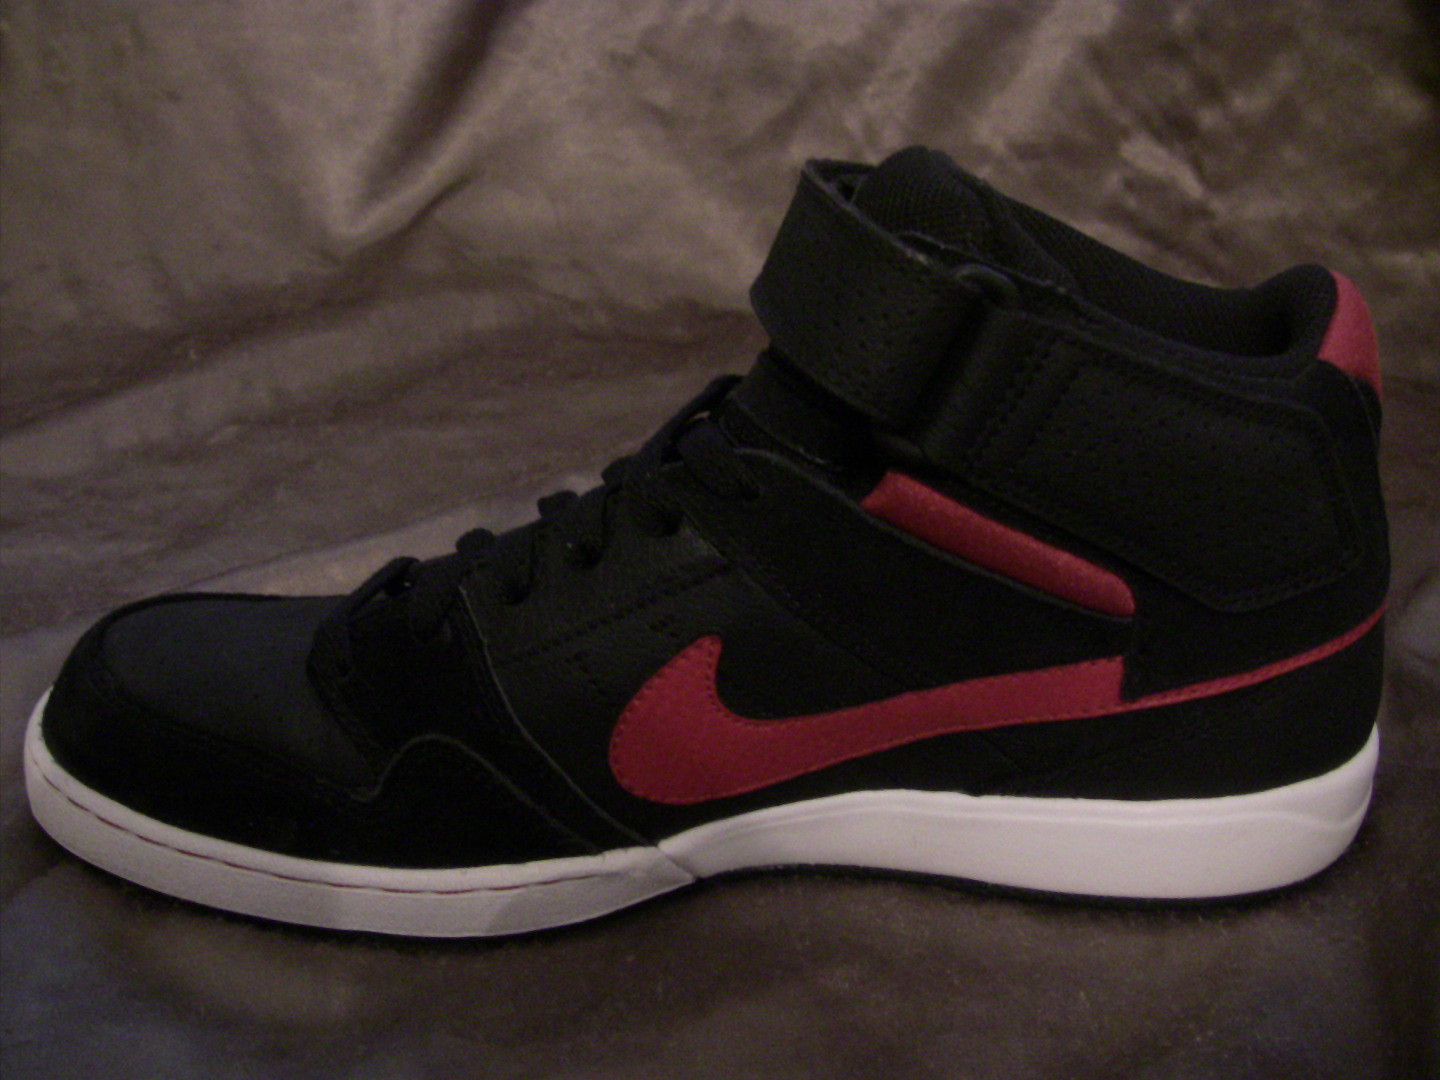 Men's NIKE MOGAN 407360 Black/Red Leather Sneakers Shoes - RIGHT SHOE ...